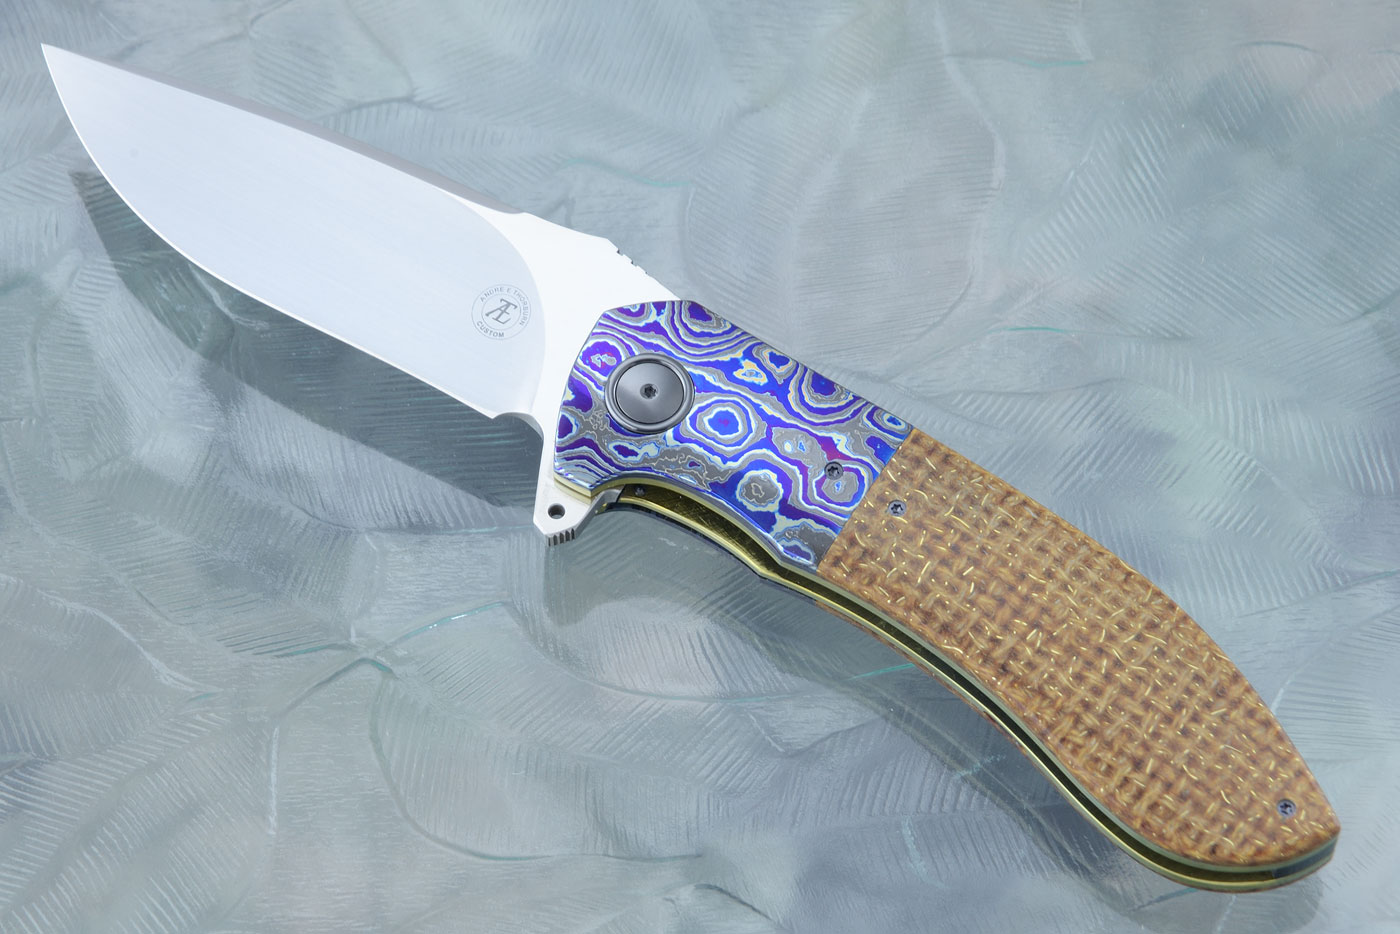 L50 Flipper with Thunderstorm Kevlar and Black Timascus (Ceramic IKBS) - CTS-XHP